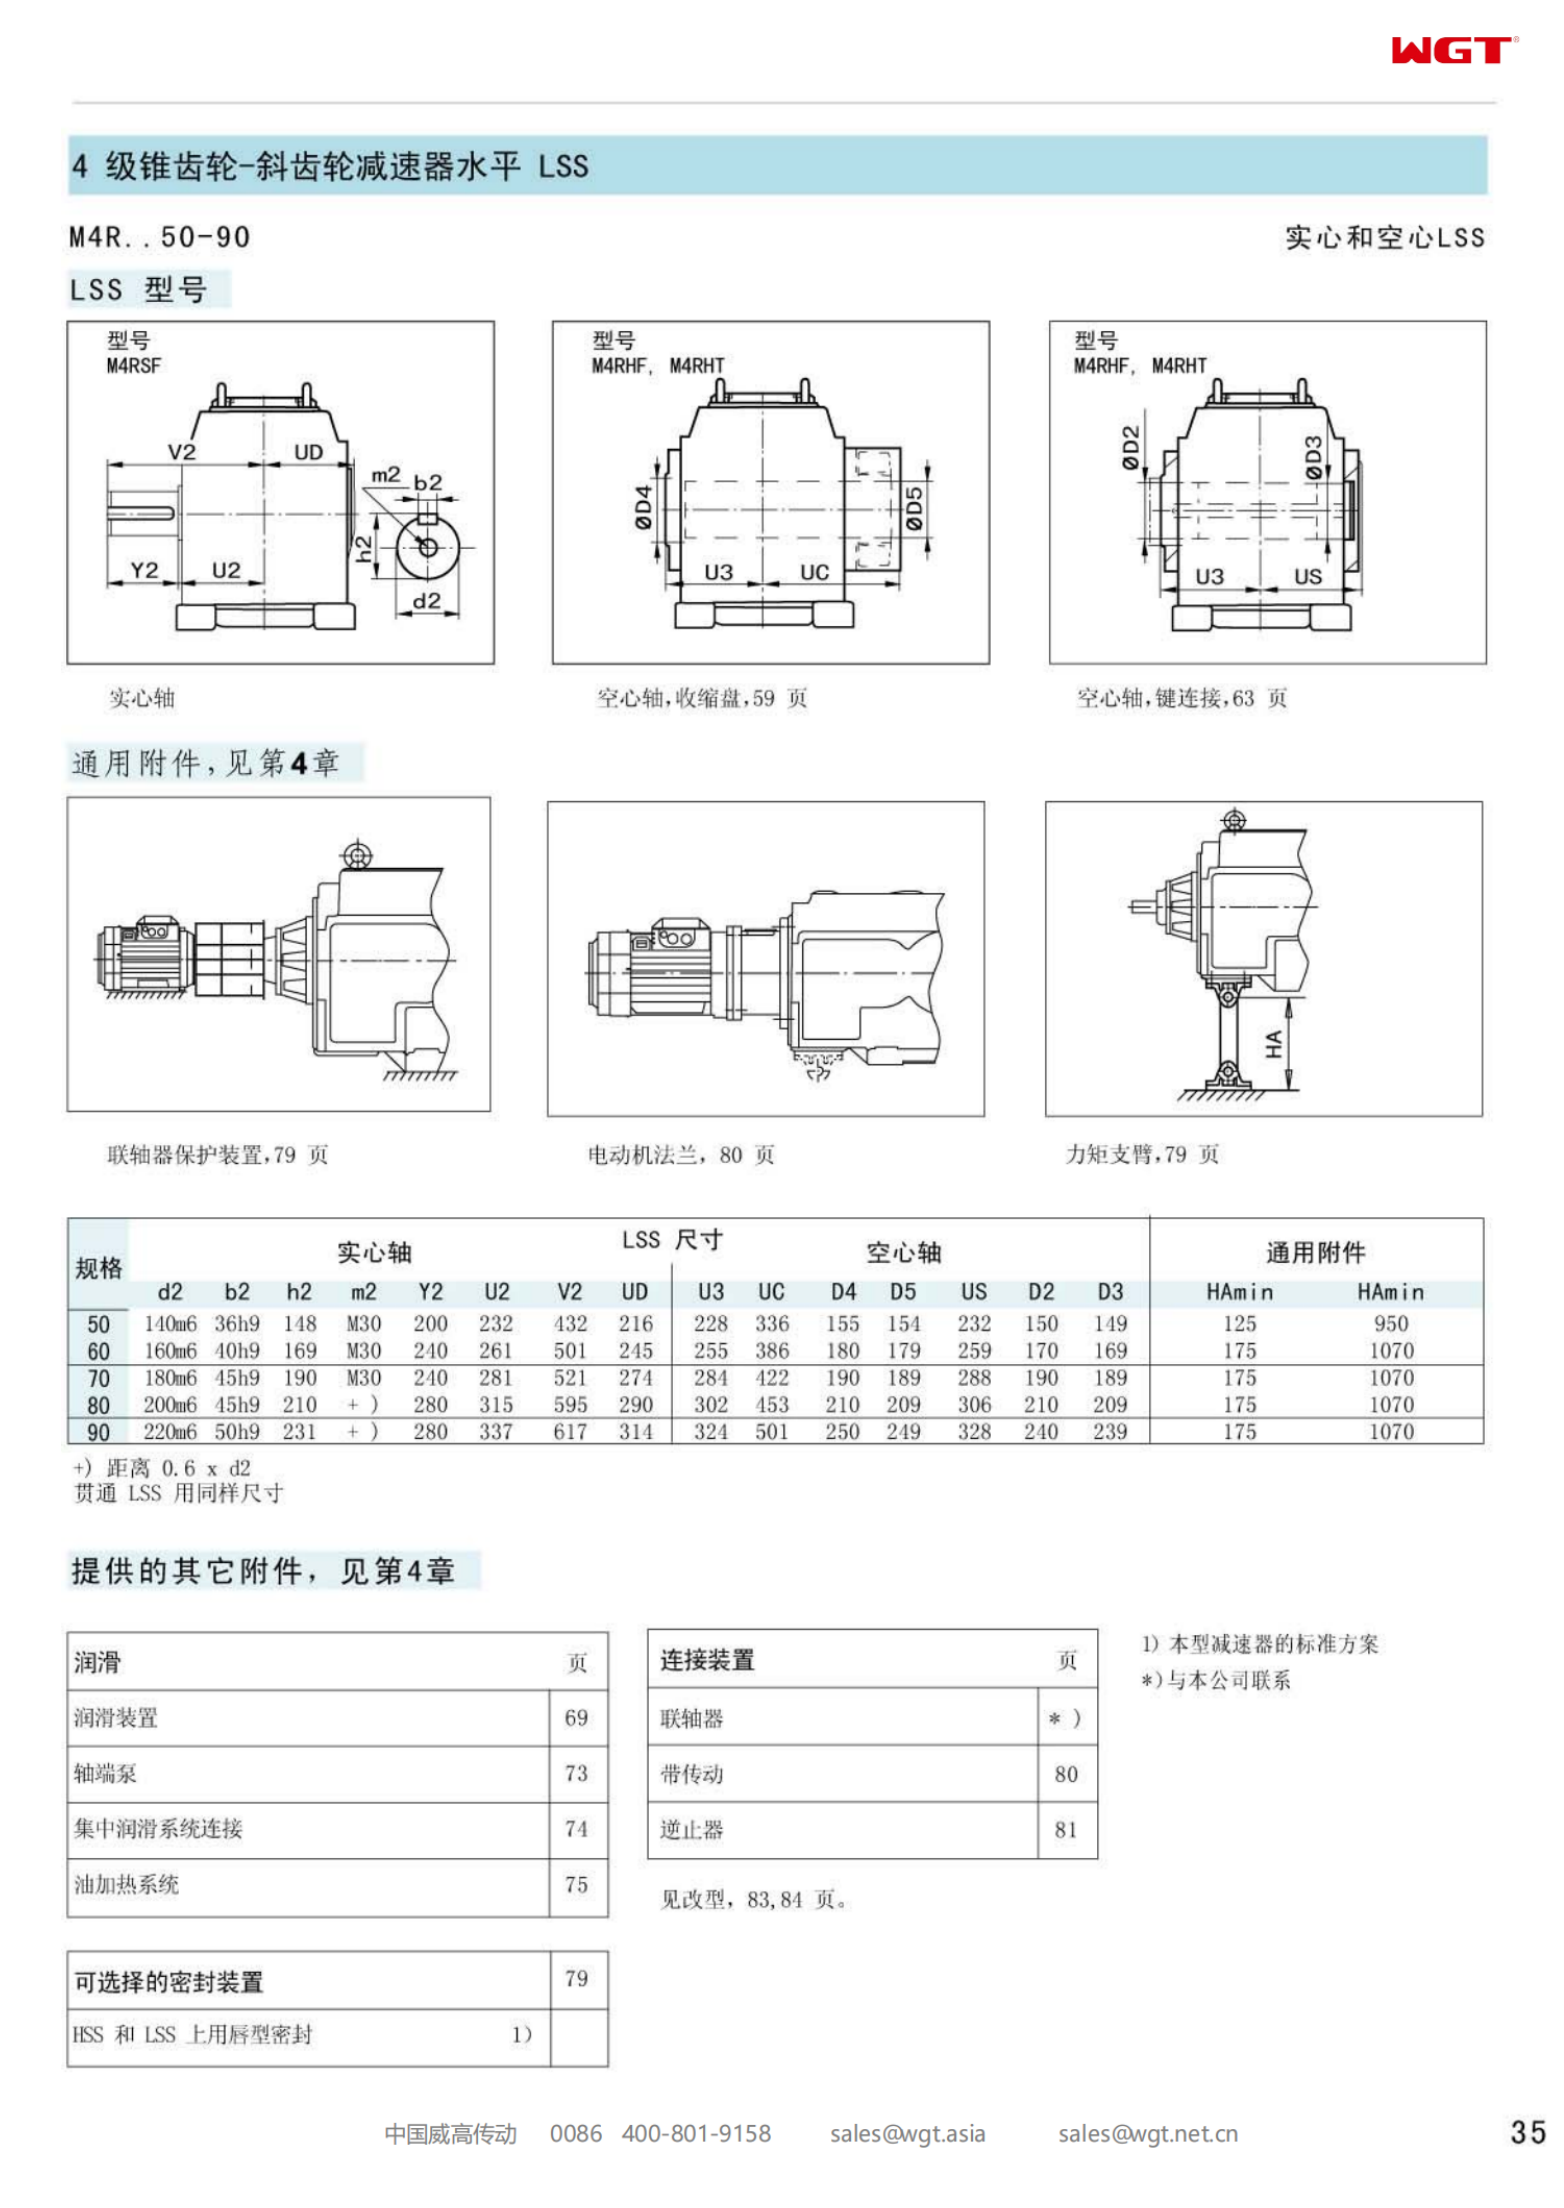 M4RSF90 Replace_SEW_M_Series Gearbox